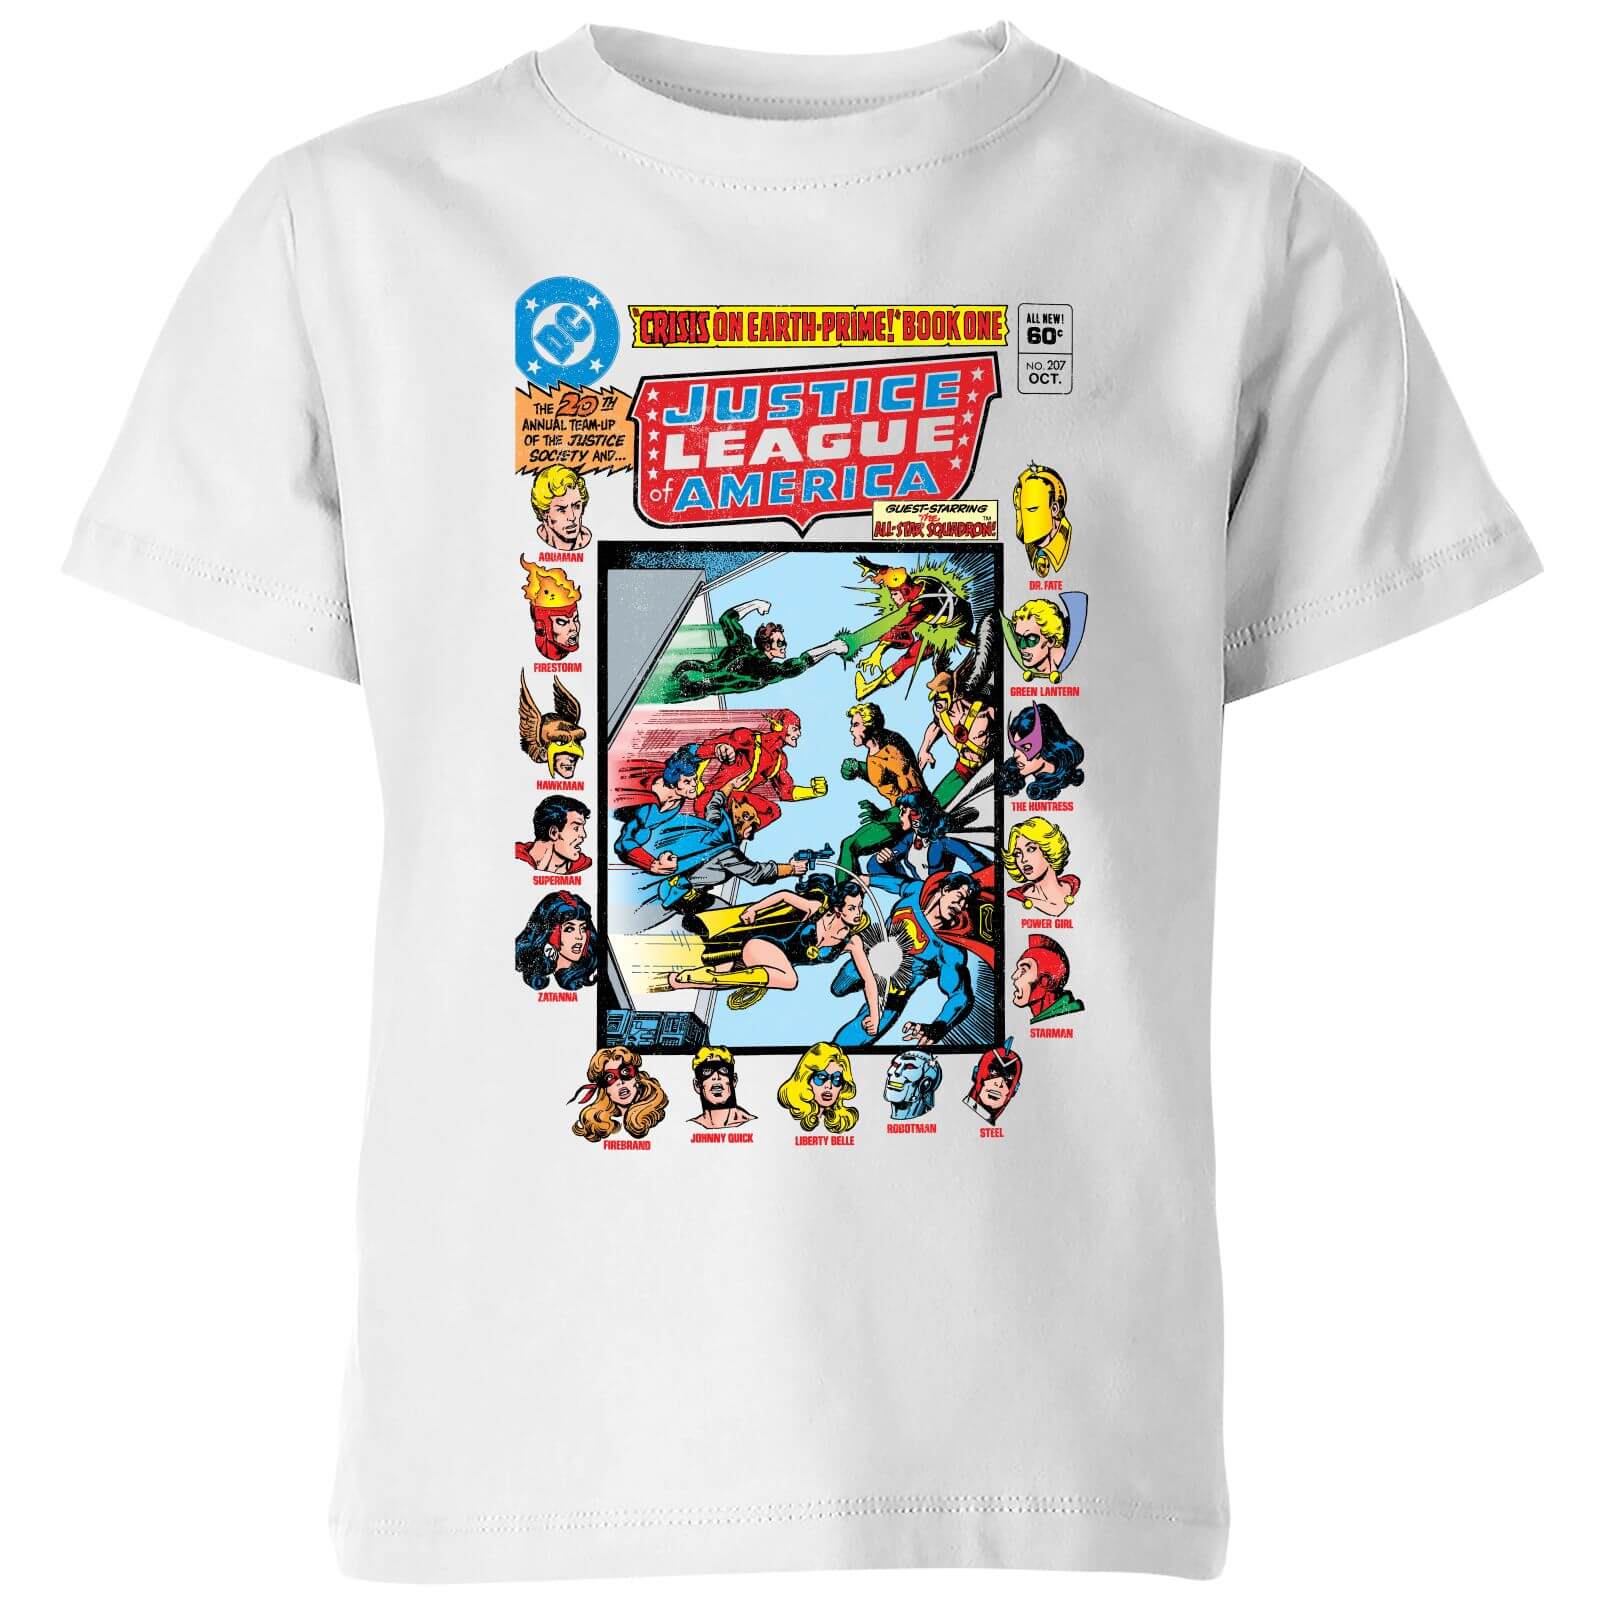 DC Comics Justice League Crisis On Earth-Prime Cover Kids' T-Shirt - White - 11-12 Years - White